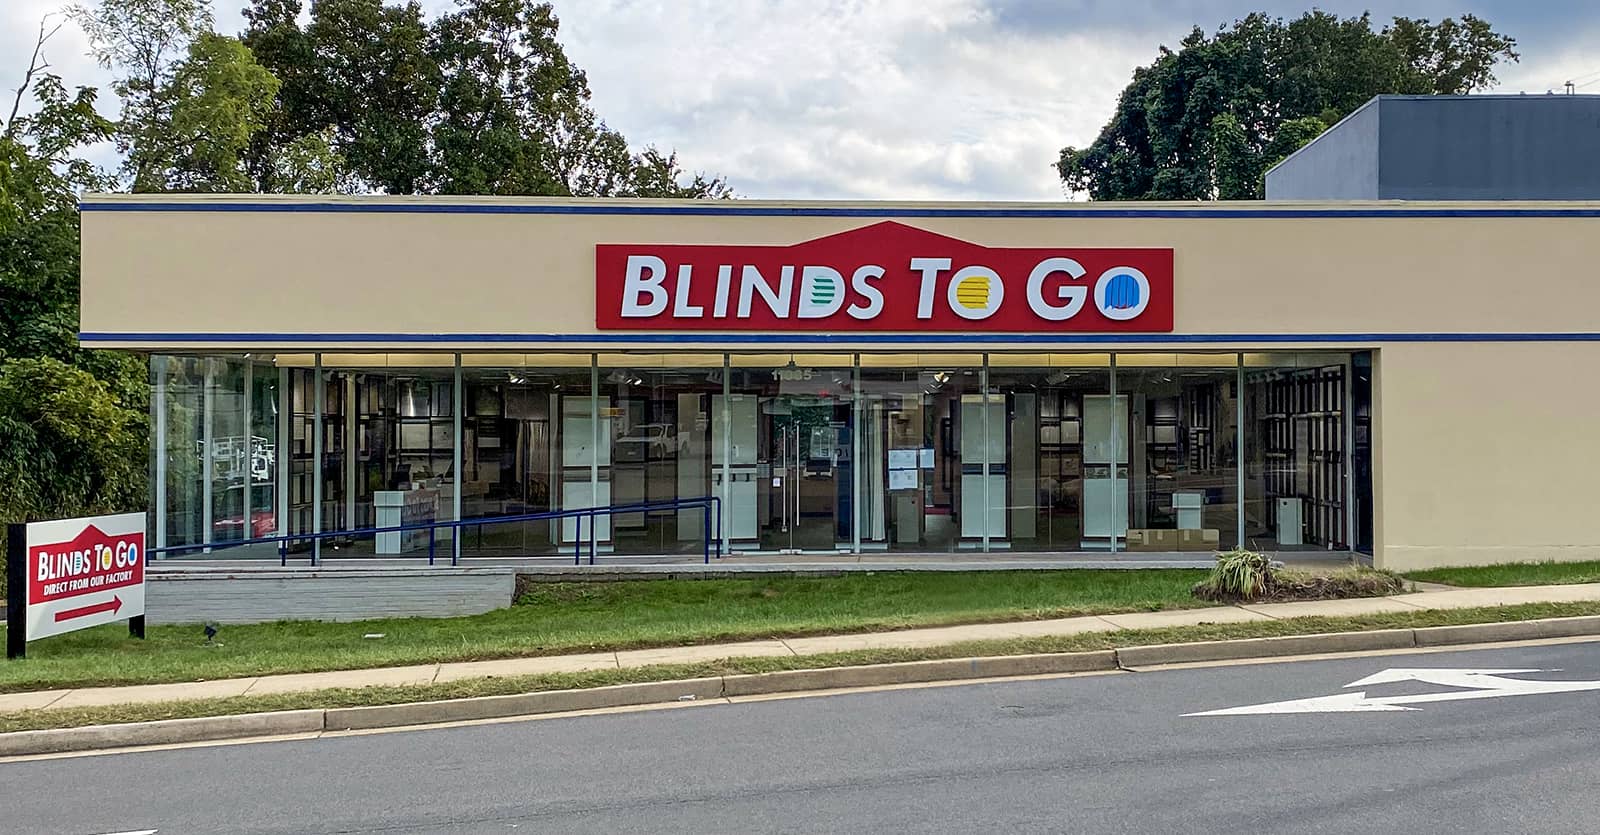 The Blinds To Go showroom, which serves the Fairfax, Virginia area.